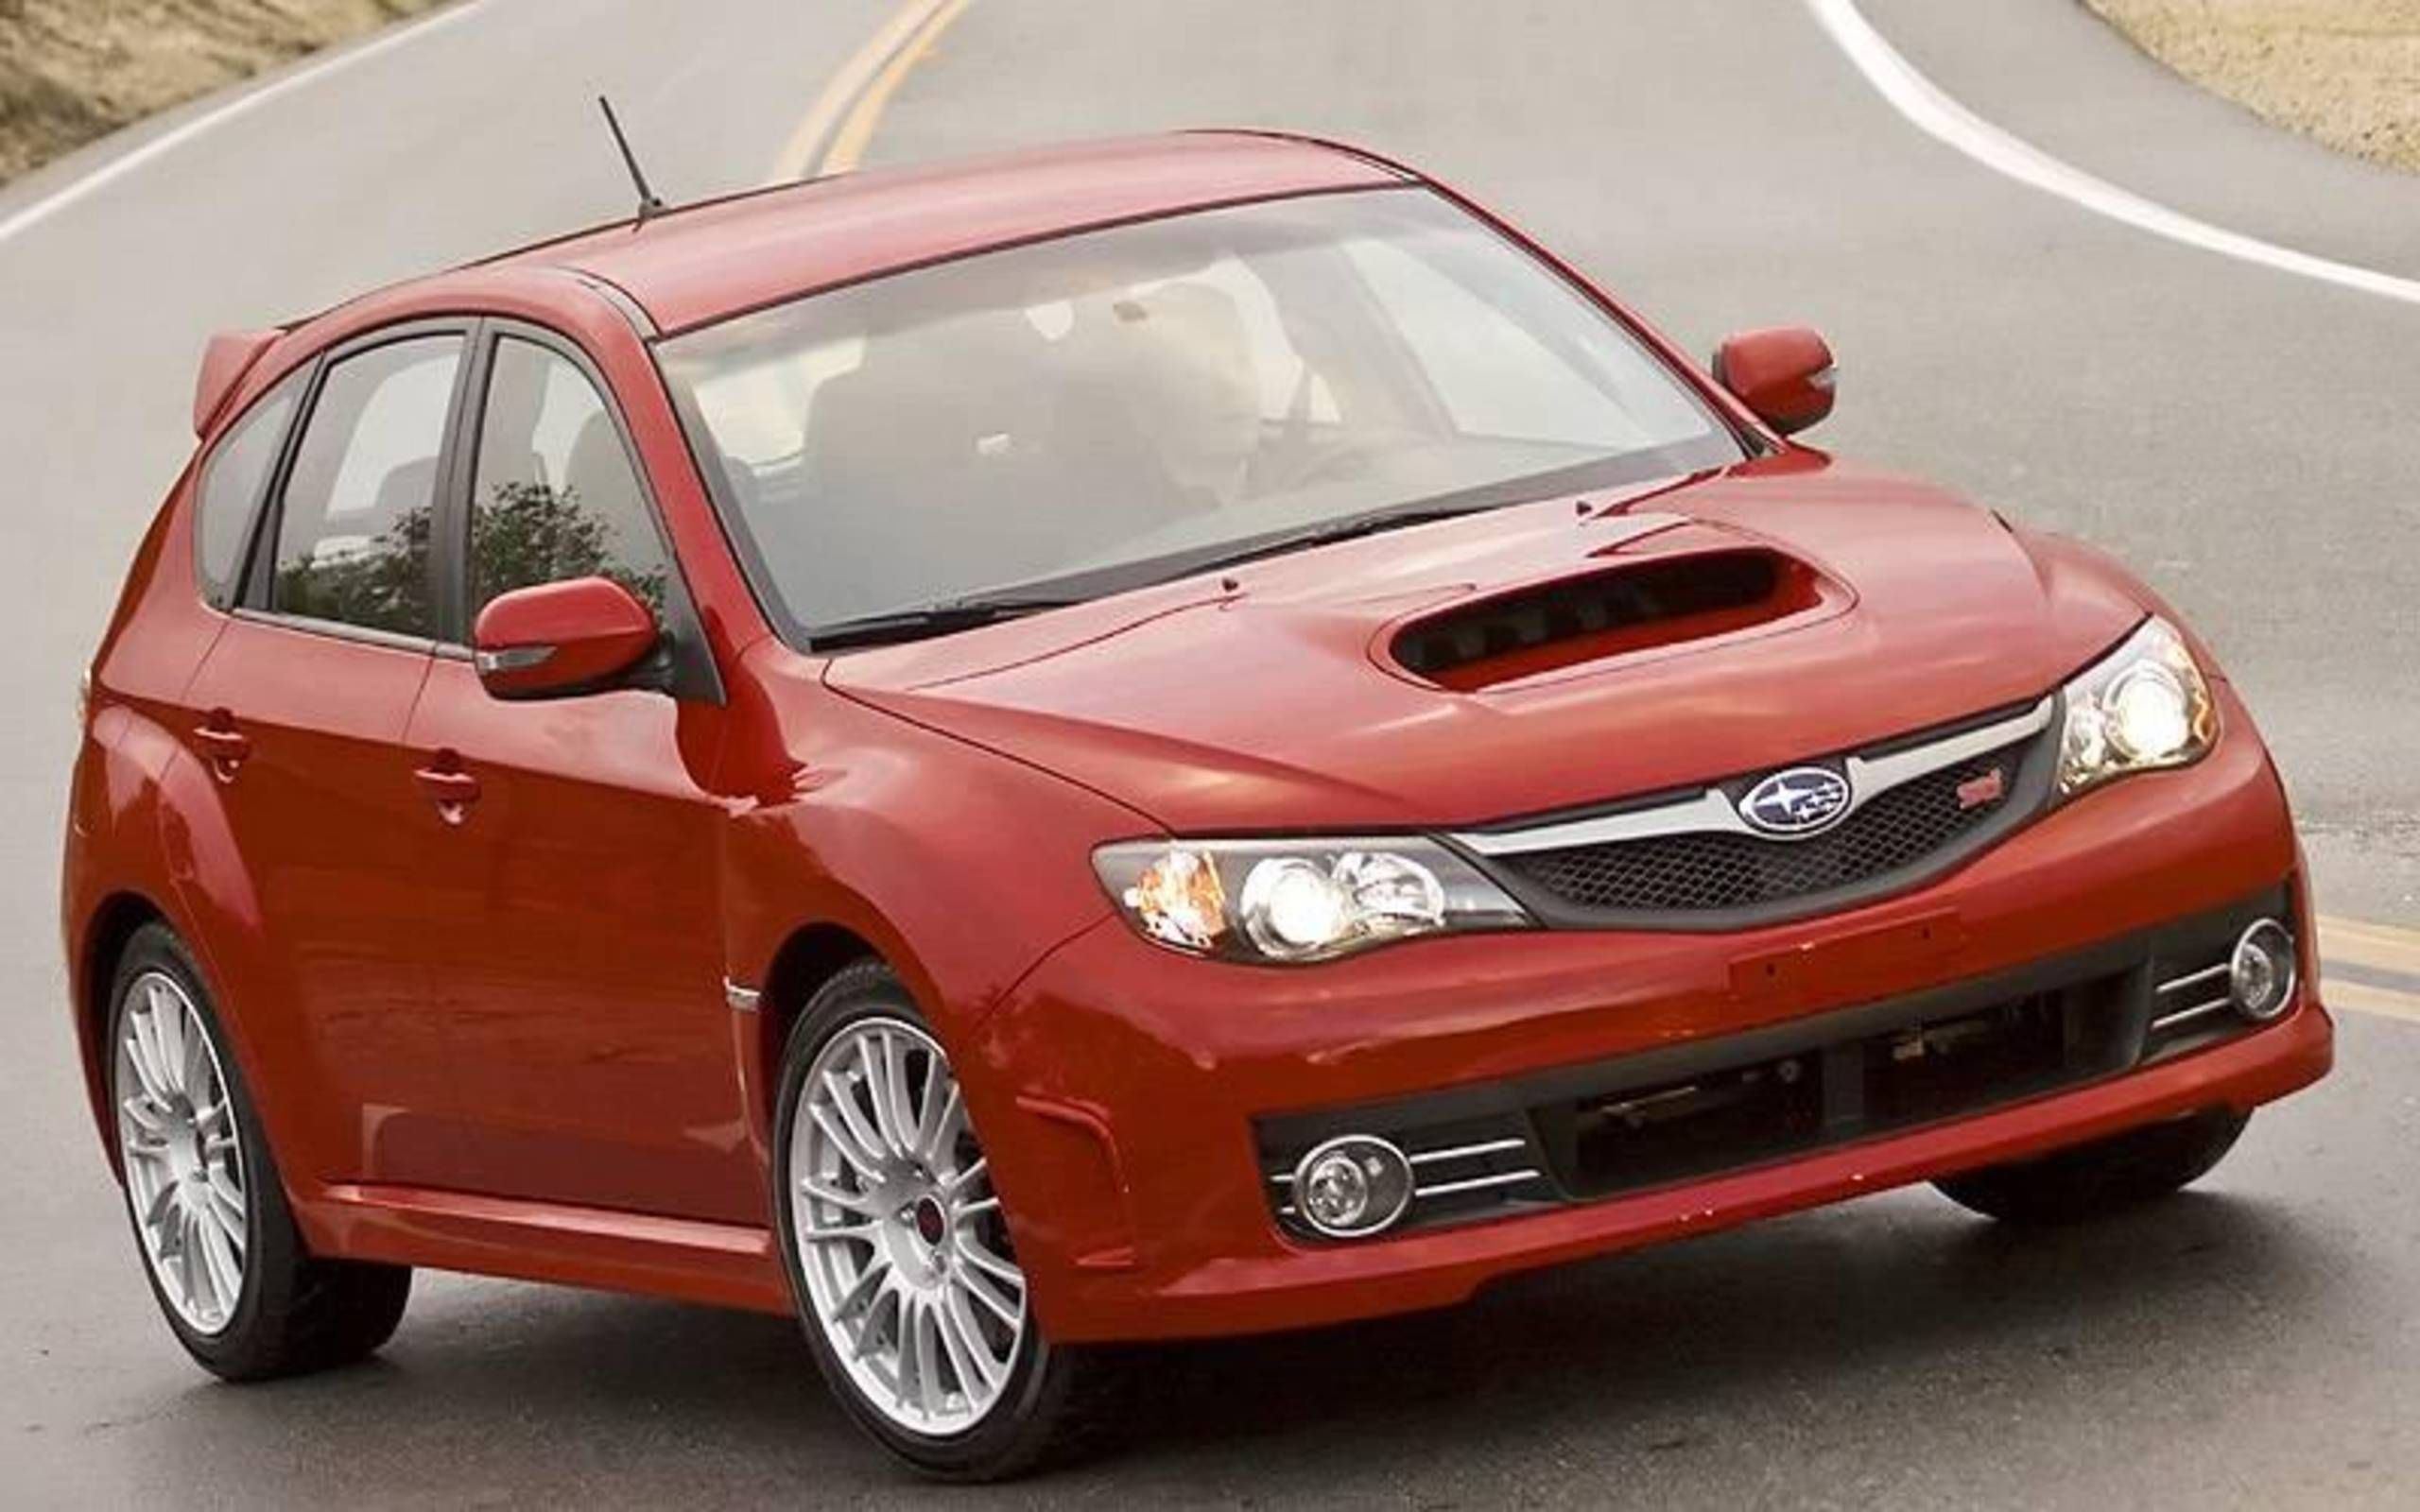 08 Subaru Wrx Sti Affluent Man Child Grows Up Subaru S New Sti May Not Be Kinder And Gentler But It S Easier To Live With In The Morning